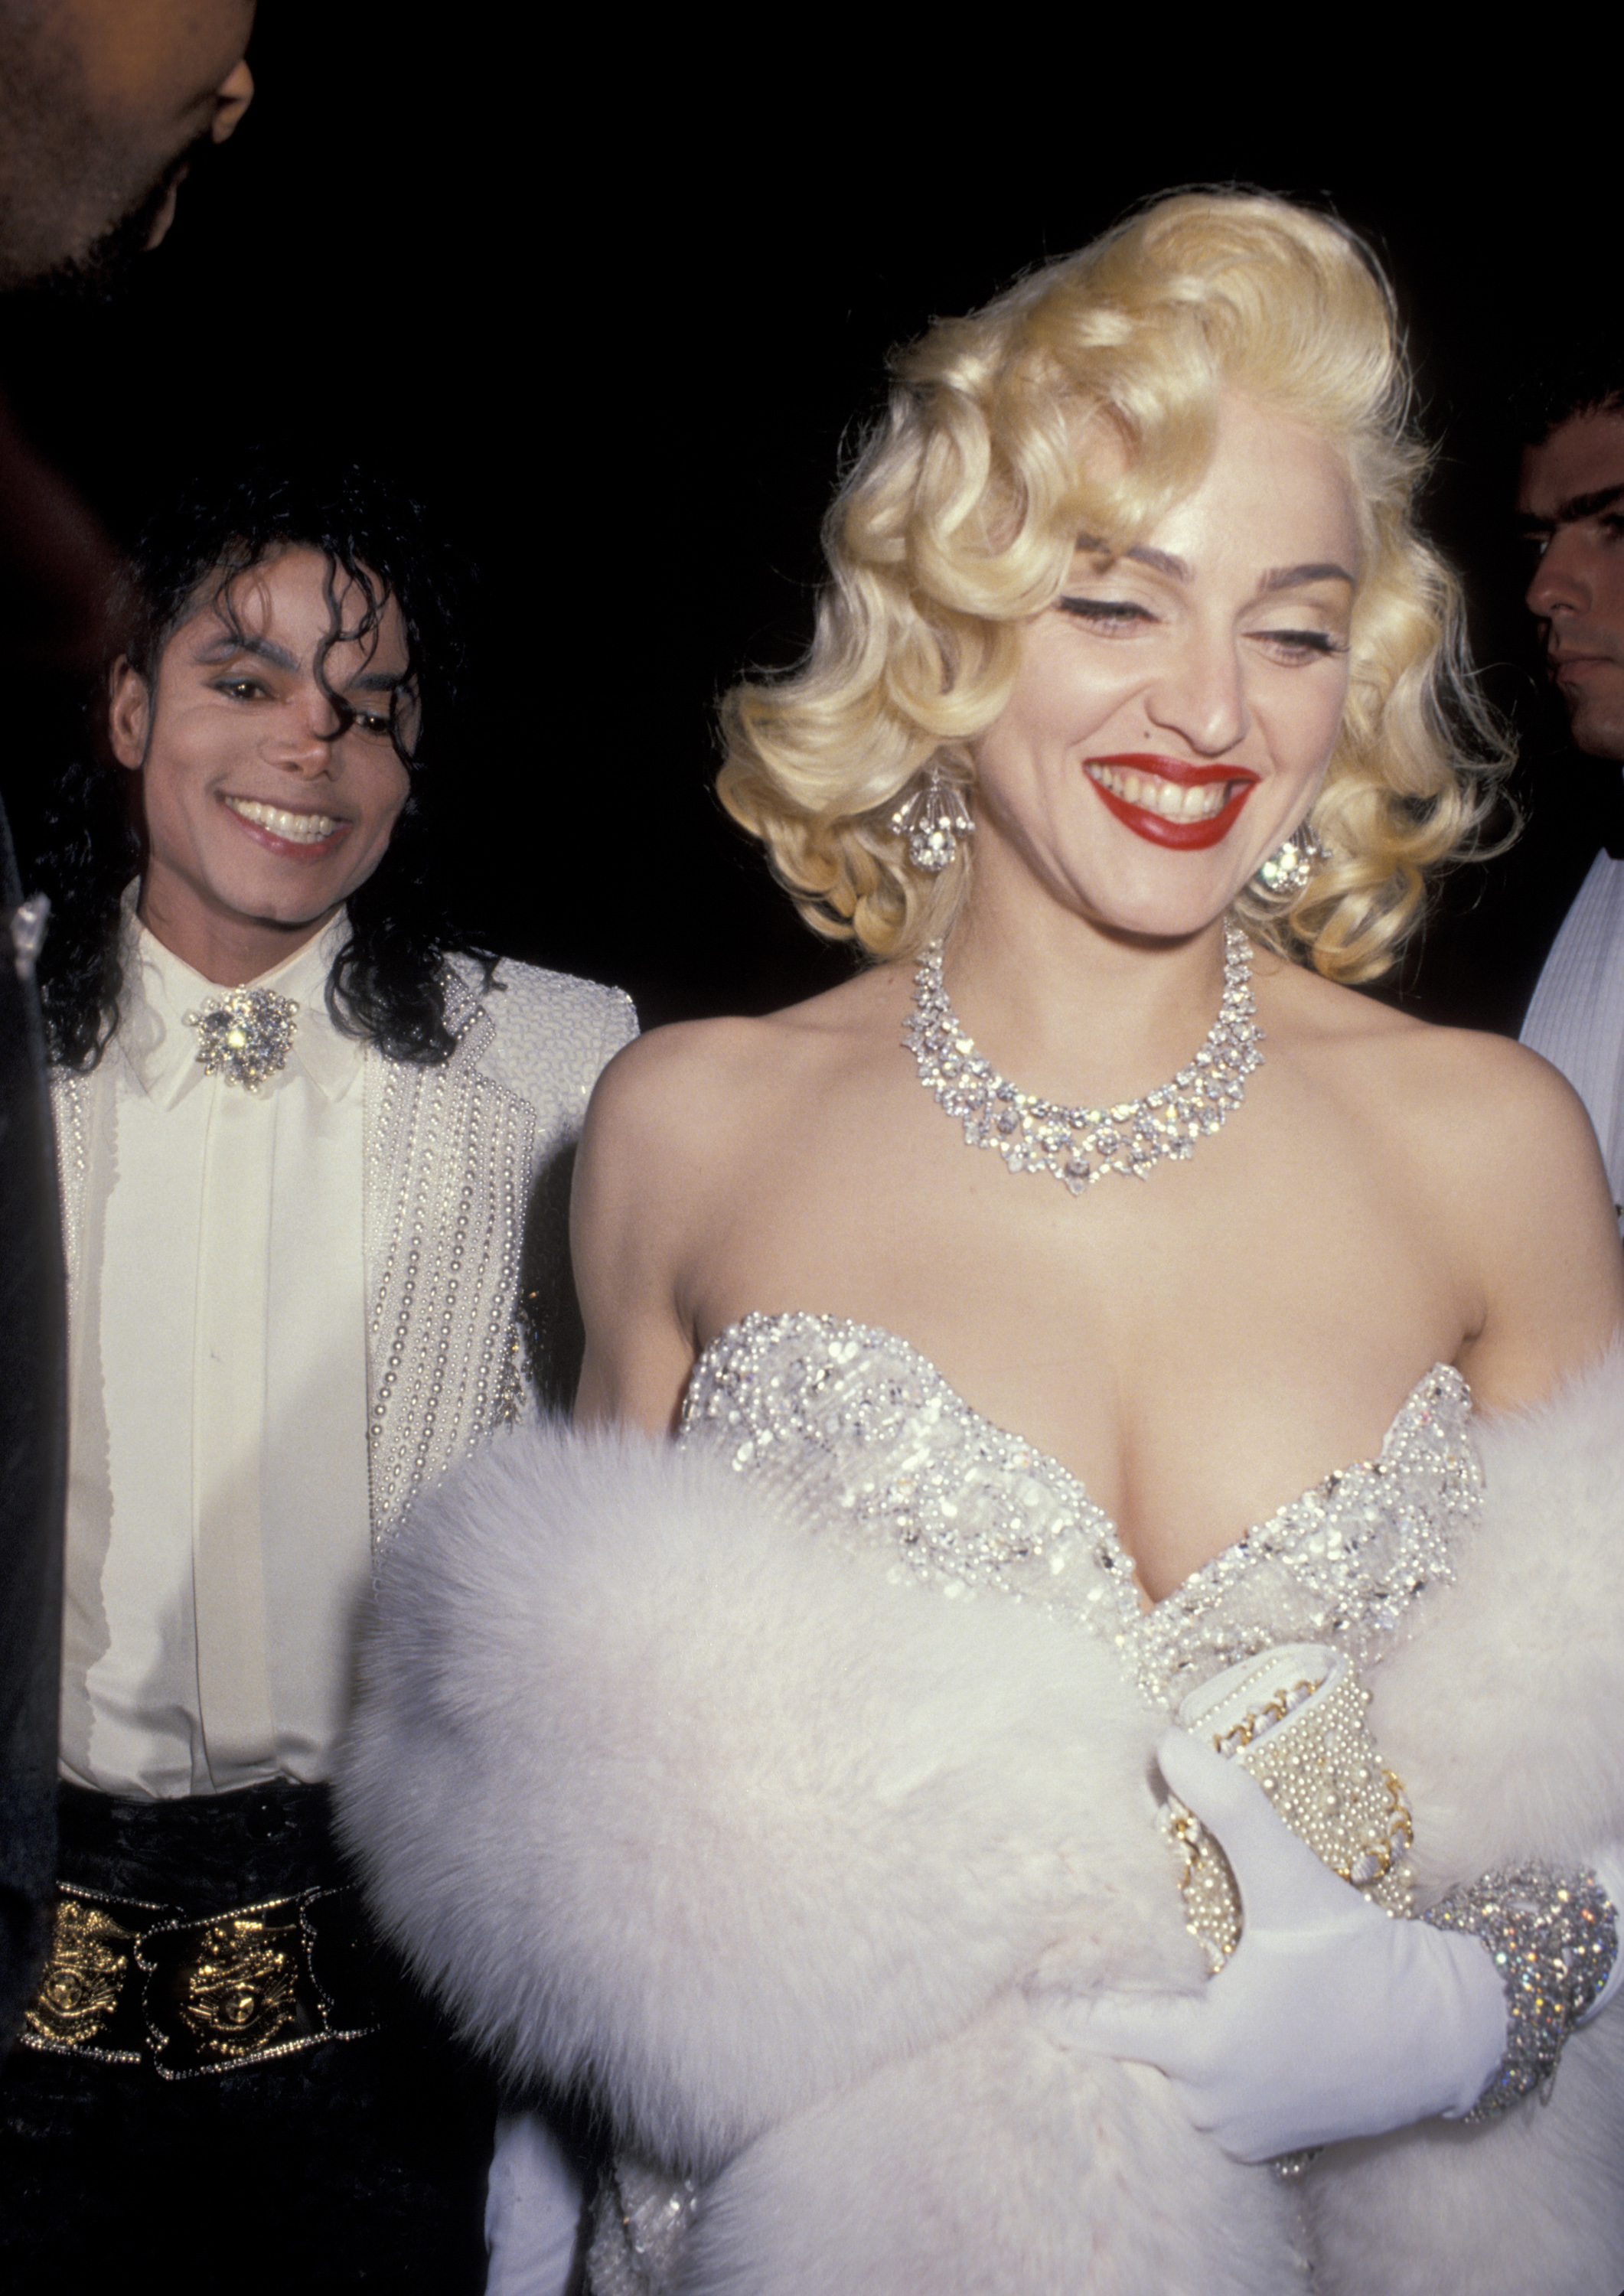 Singer Michael Jackson and Madonna at the 63rd Annual Academy Awards after-party at Spago's on March 25, 1991. | Source: Getty Images